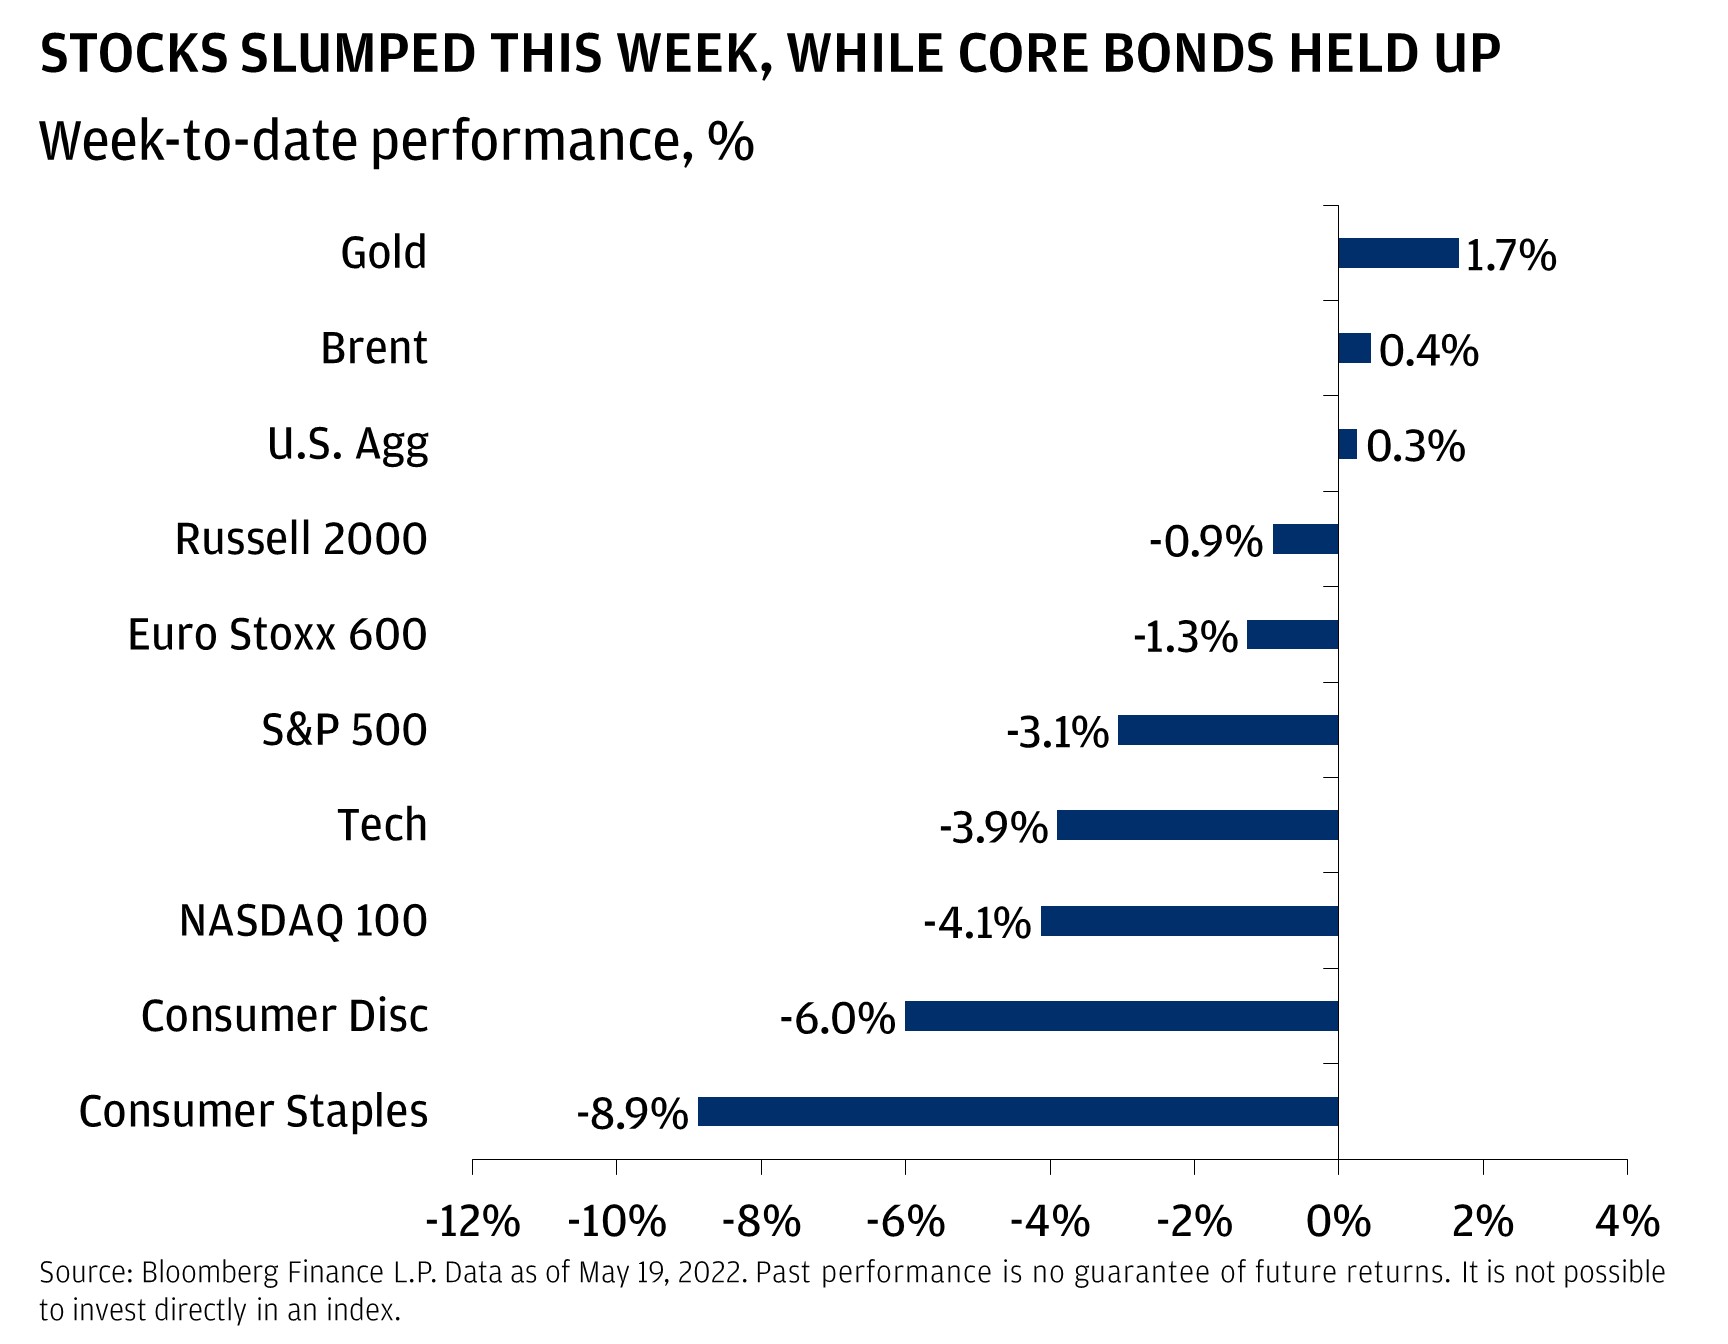 This chart shows the week-to-date performance of asset classes (May 16–May 19, 2022)